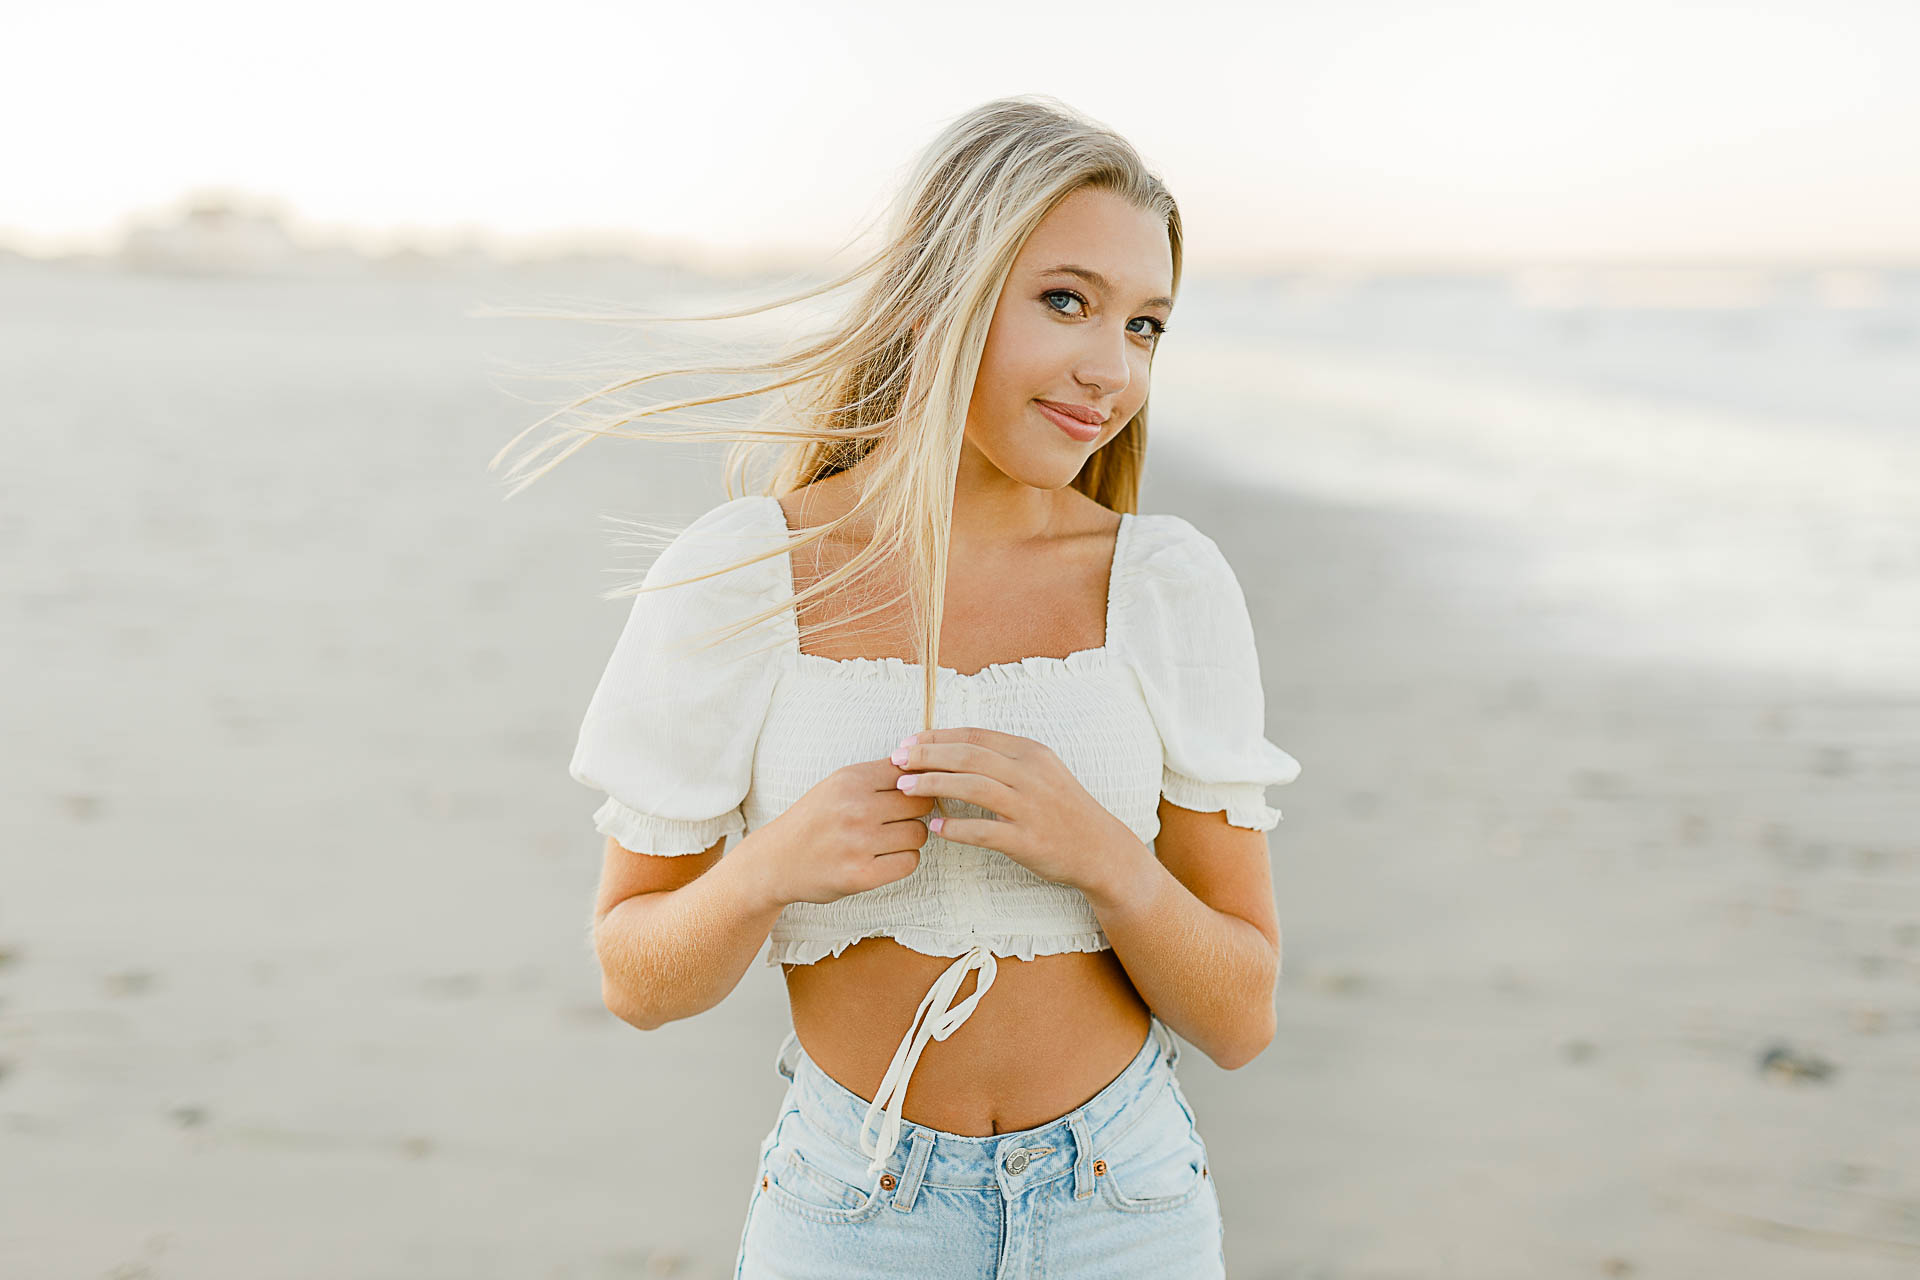 Photo by Scituate Senior Photographer Christina Runnals | High school senior girl smiling subtly at the camera on the beach